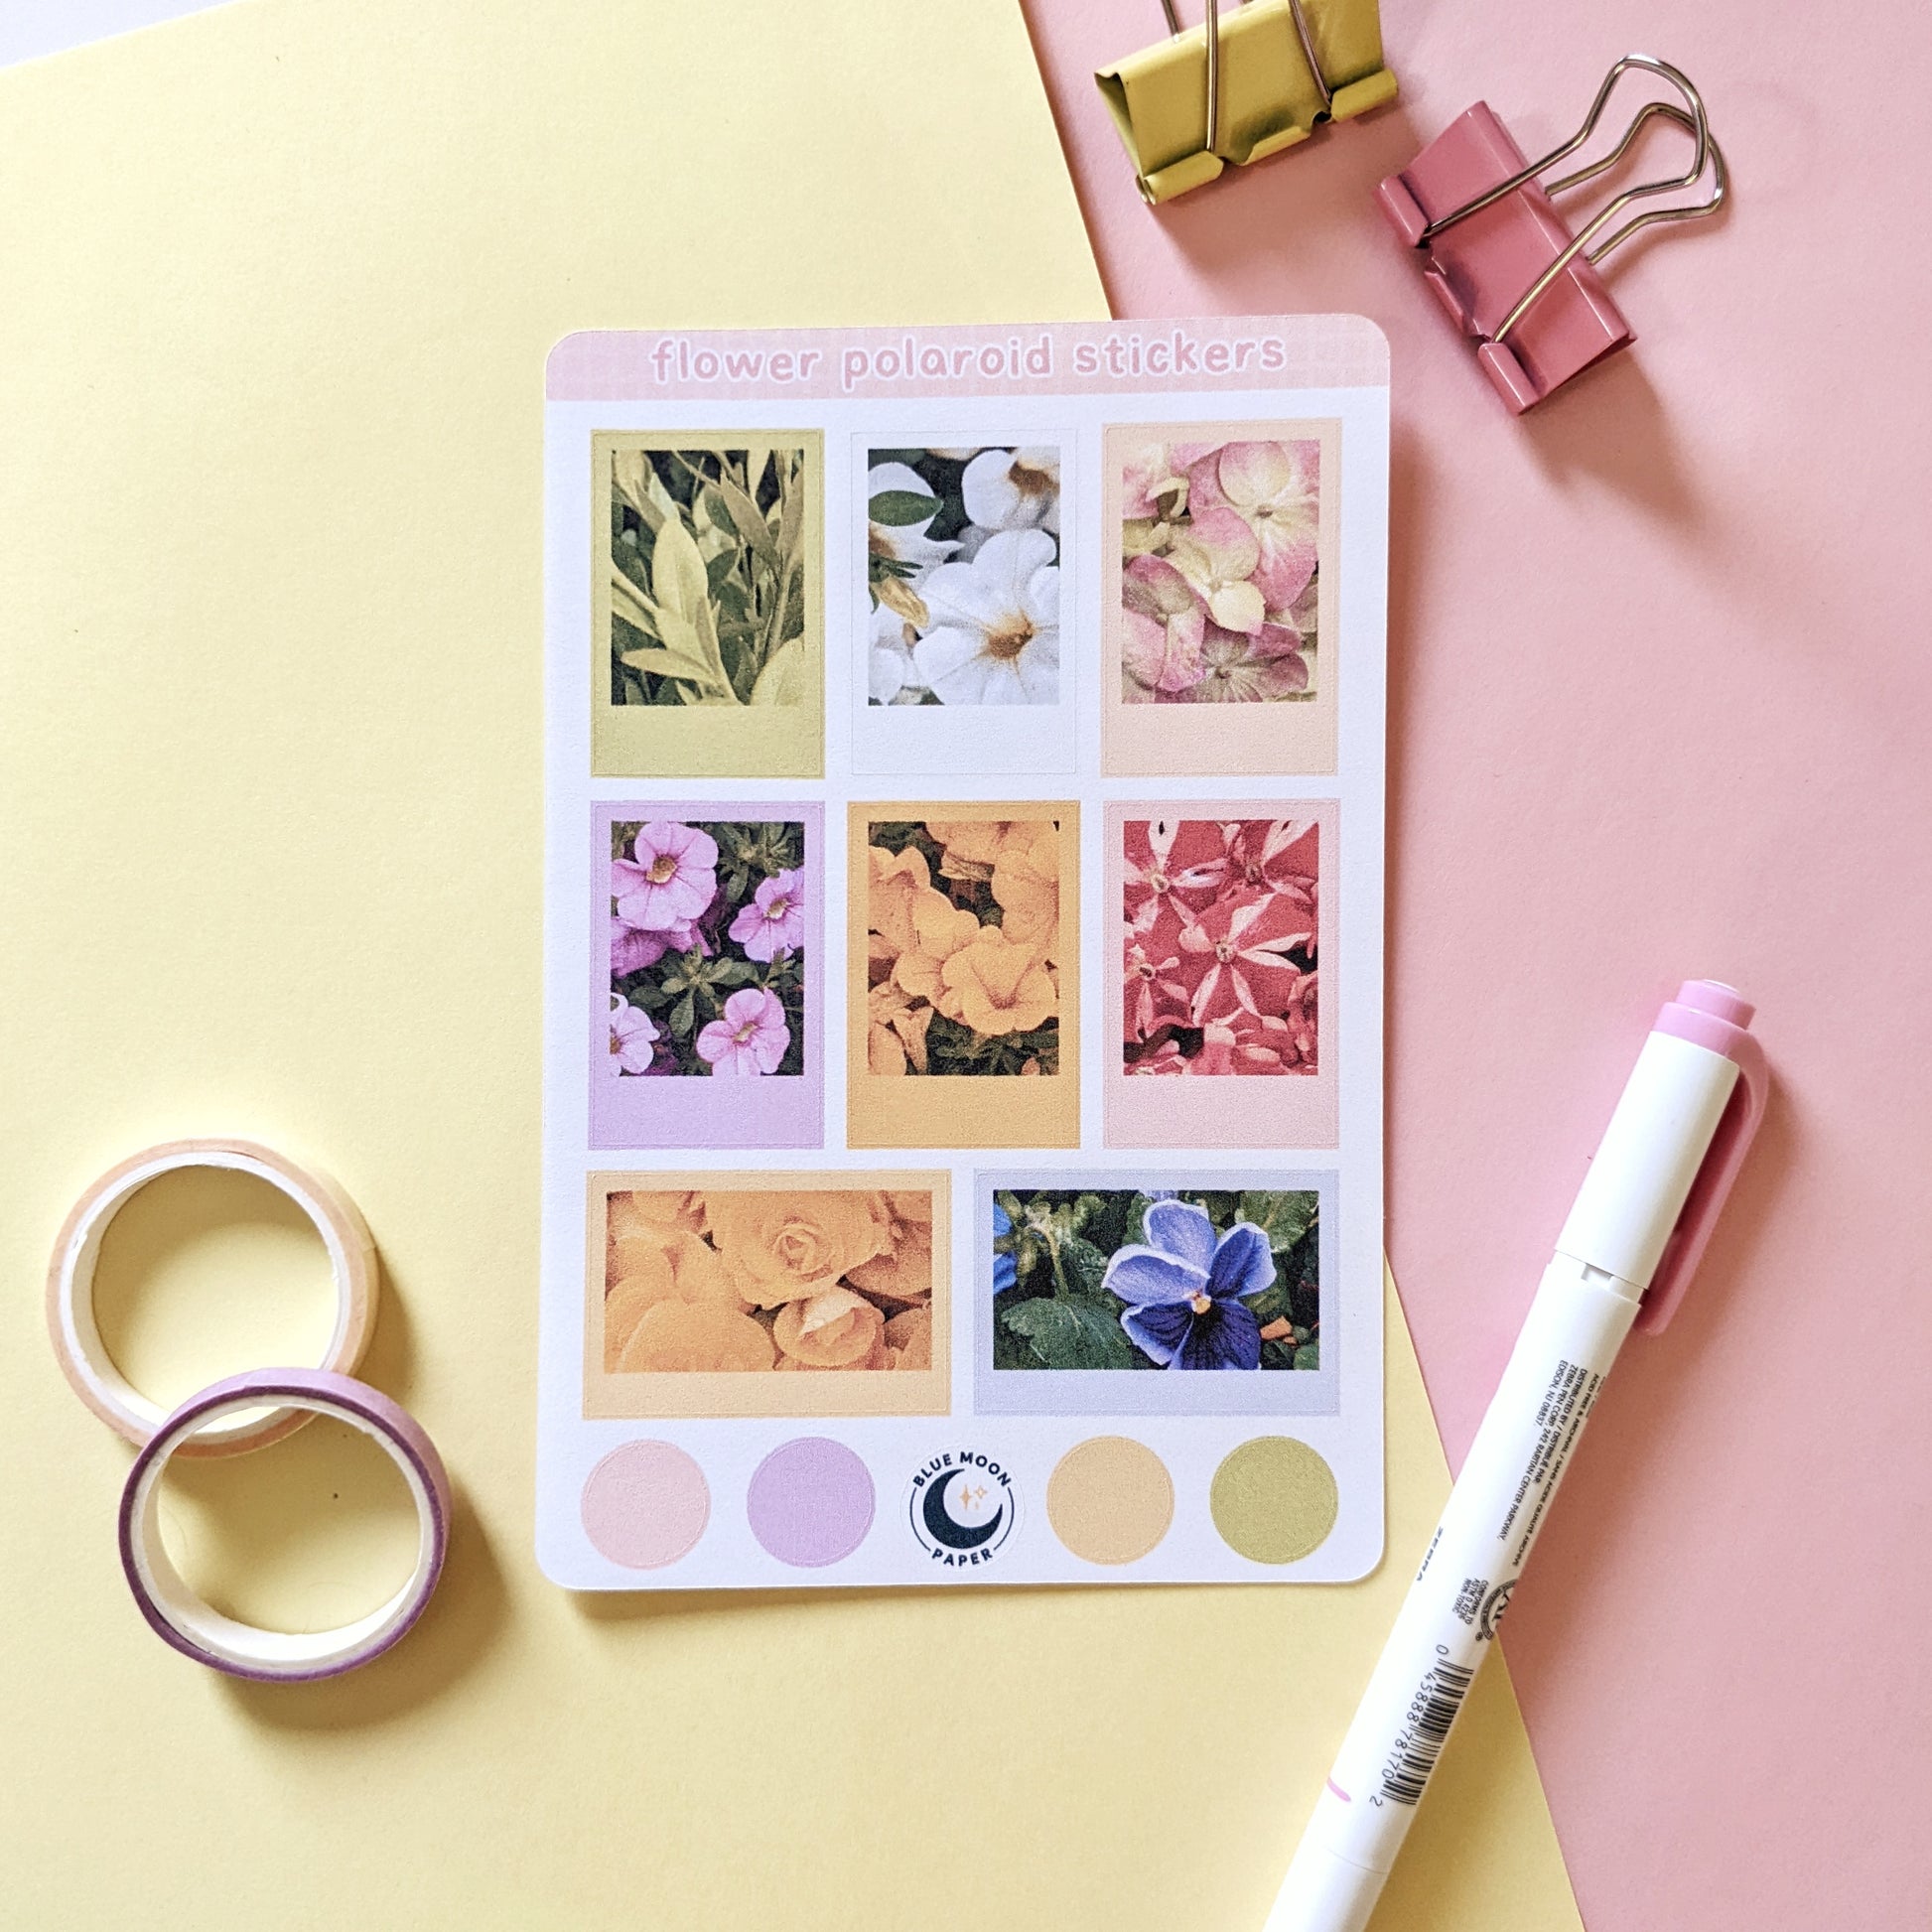 Sticker sheet featuring photos of flowers inside polaroid-like frames, along with coloured dots along the bottom.